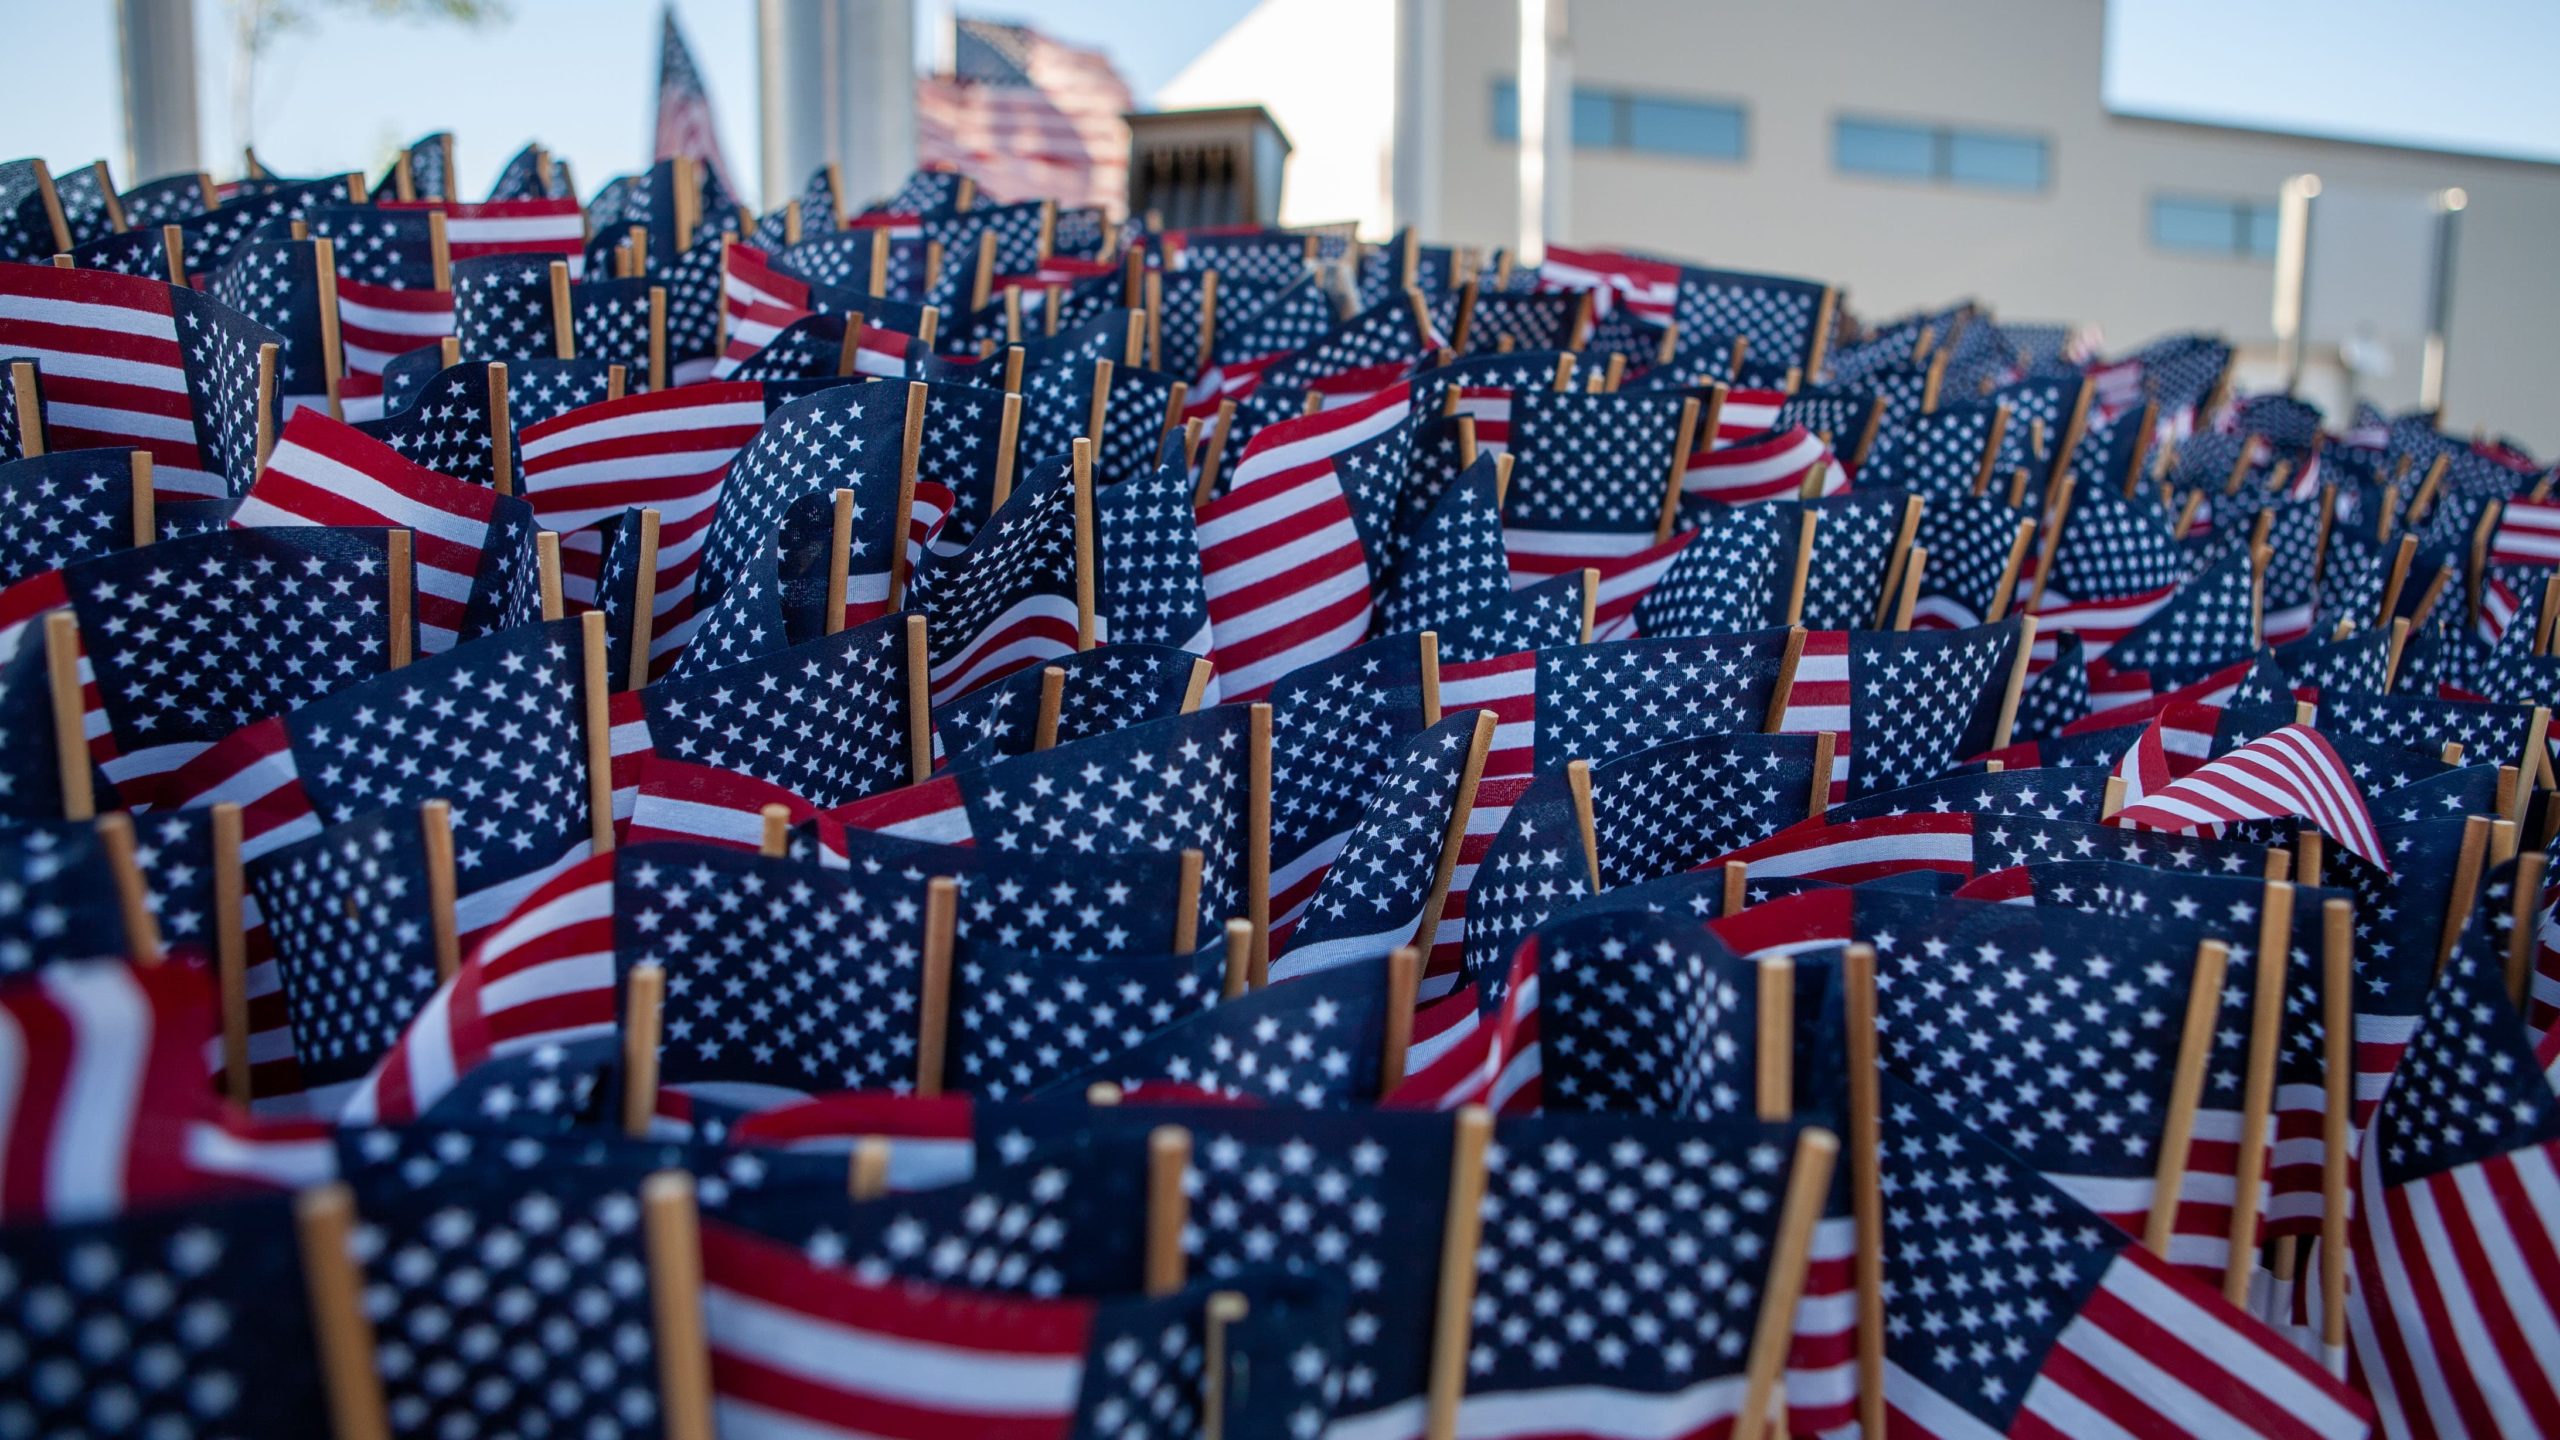 3000 flags placed in the ground representing those killed on 9/11